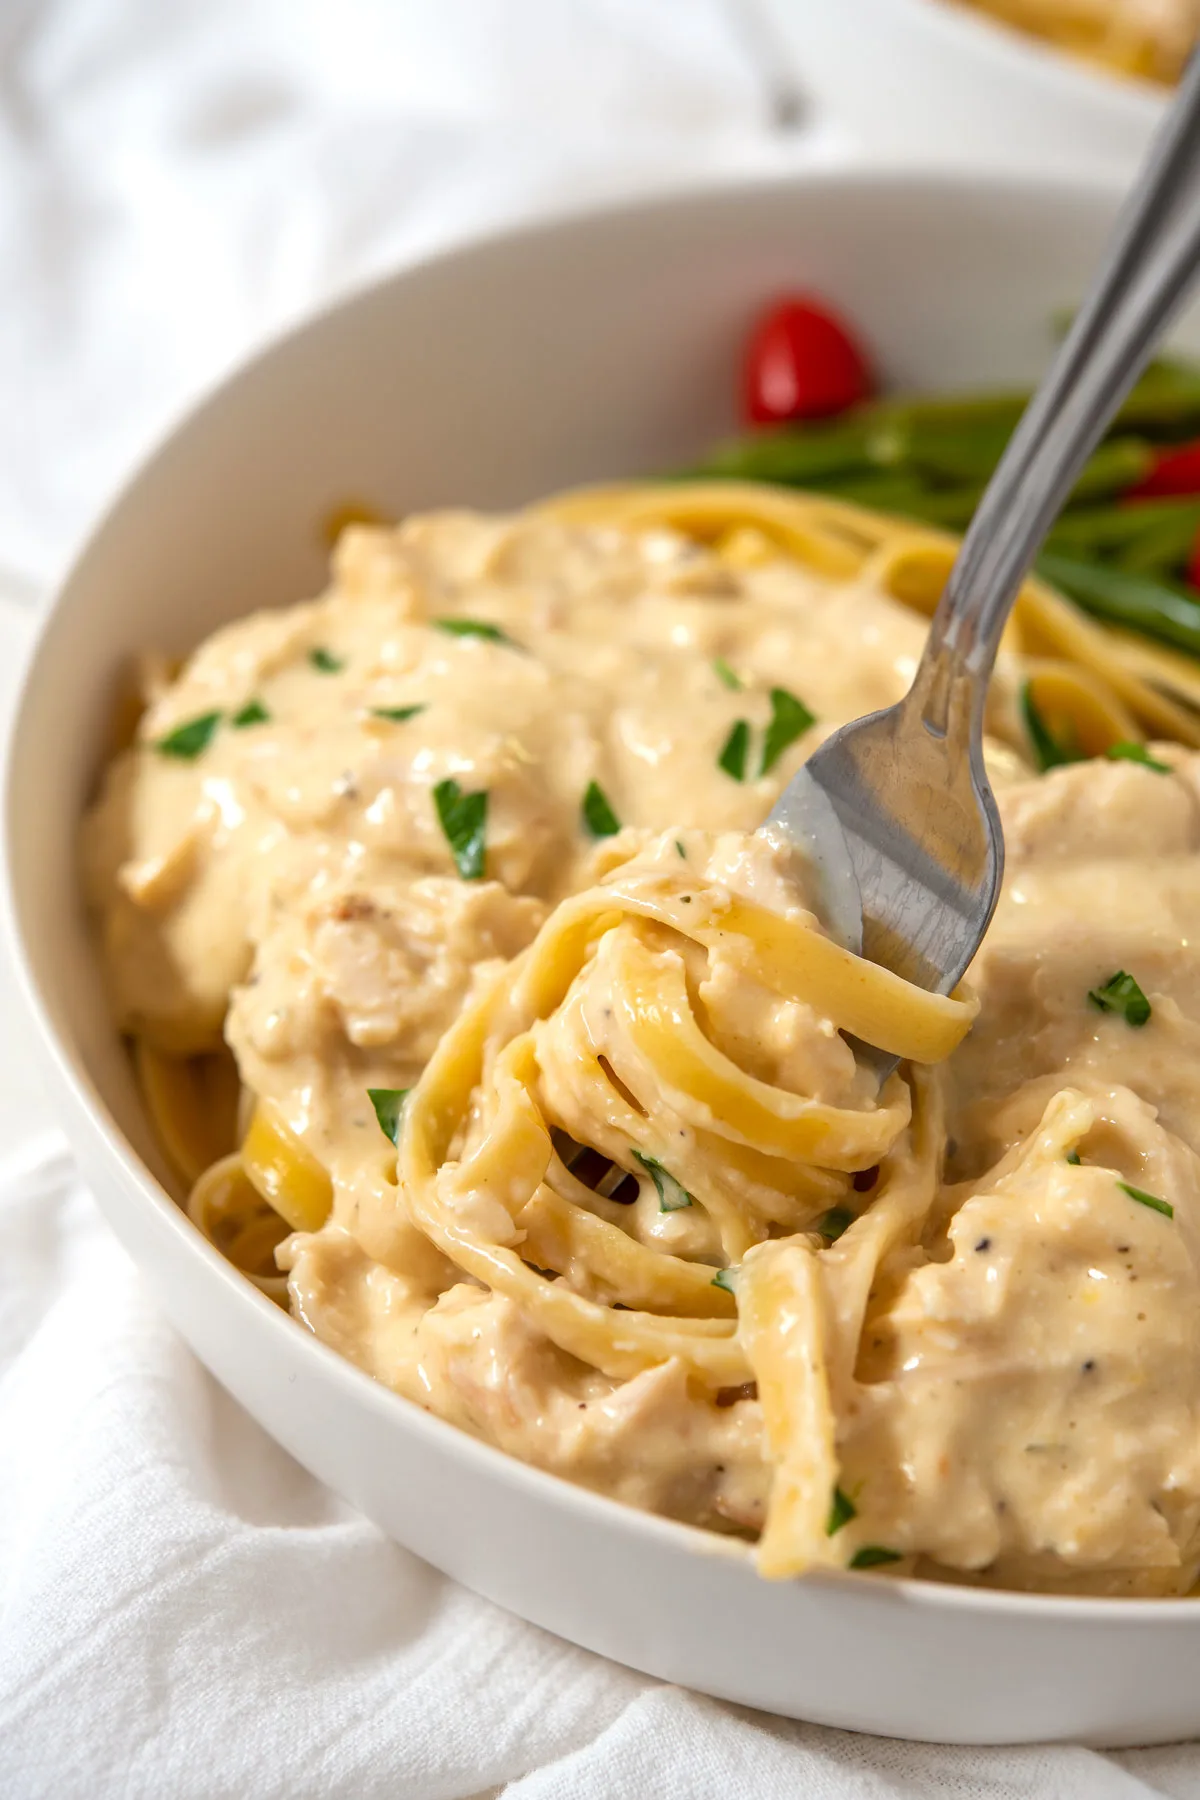 Plate of creamy Italian chicken with linguine